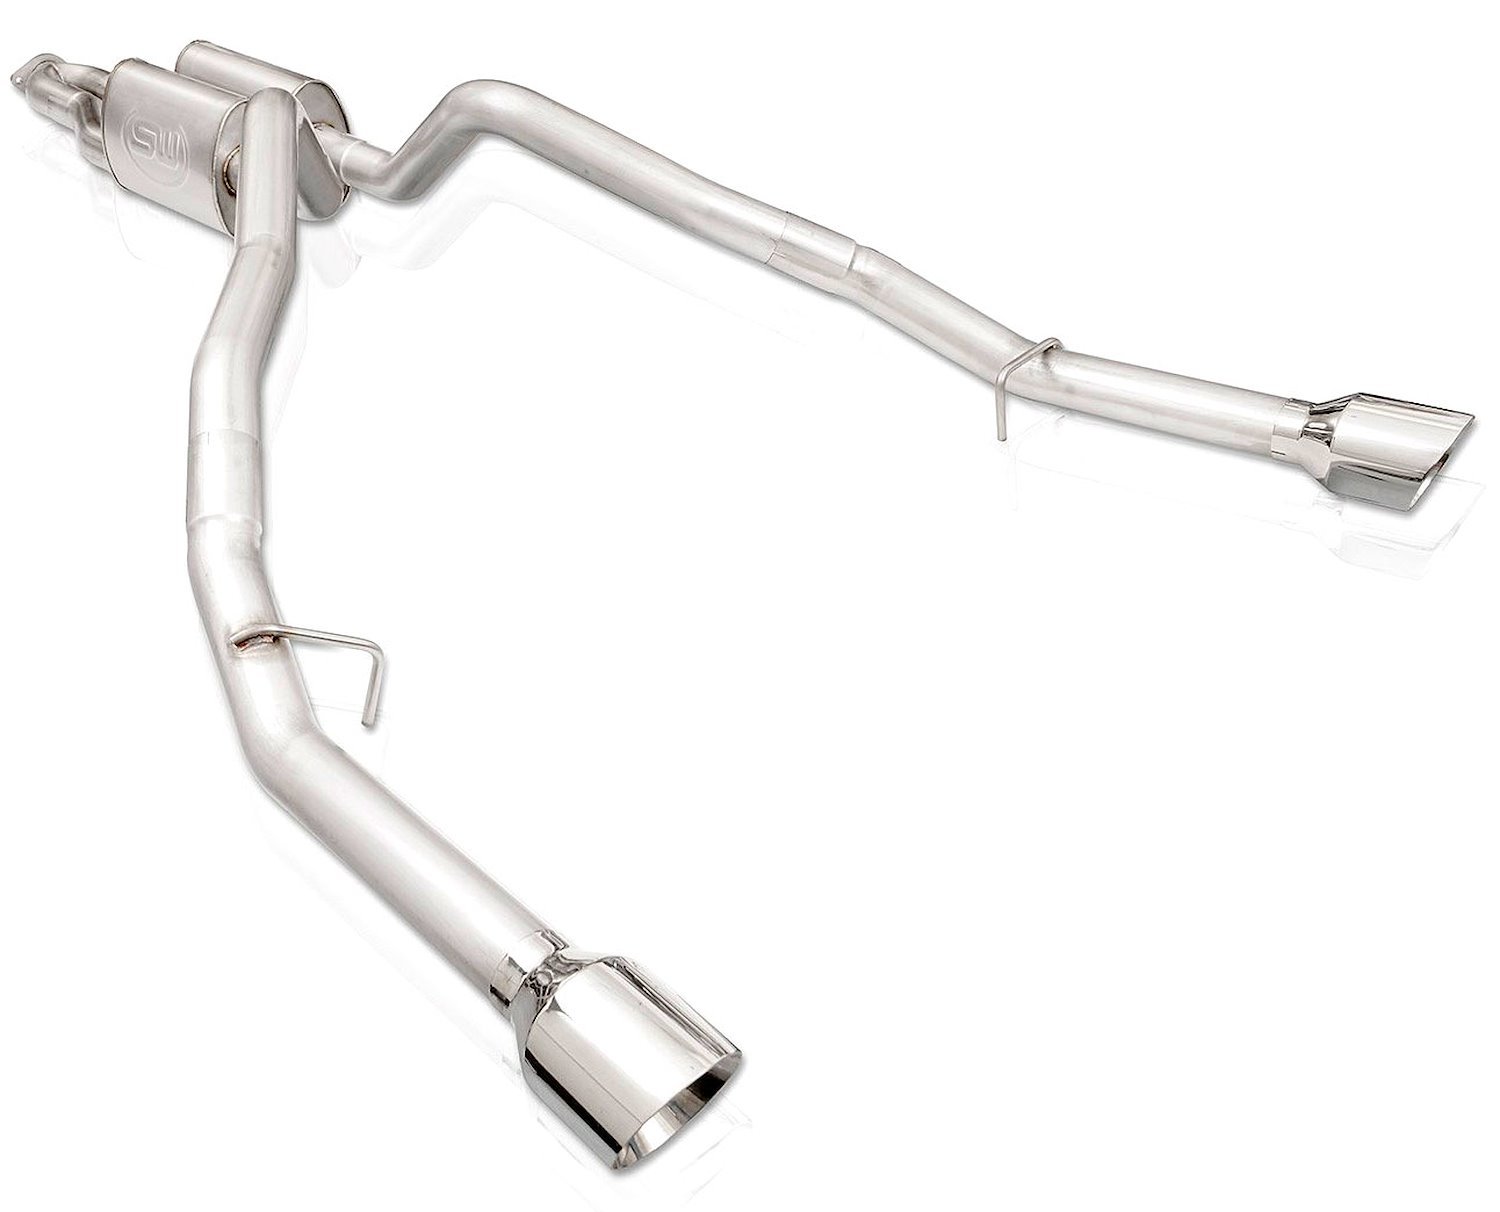 Redline Series Cat-Back Exhaust System with Y-Pipe & X-Pipe Dodge Ram 1500 5.7L - 5 in. Polished Tips - Aggressive Sound